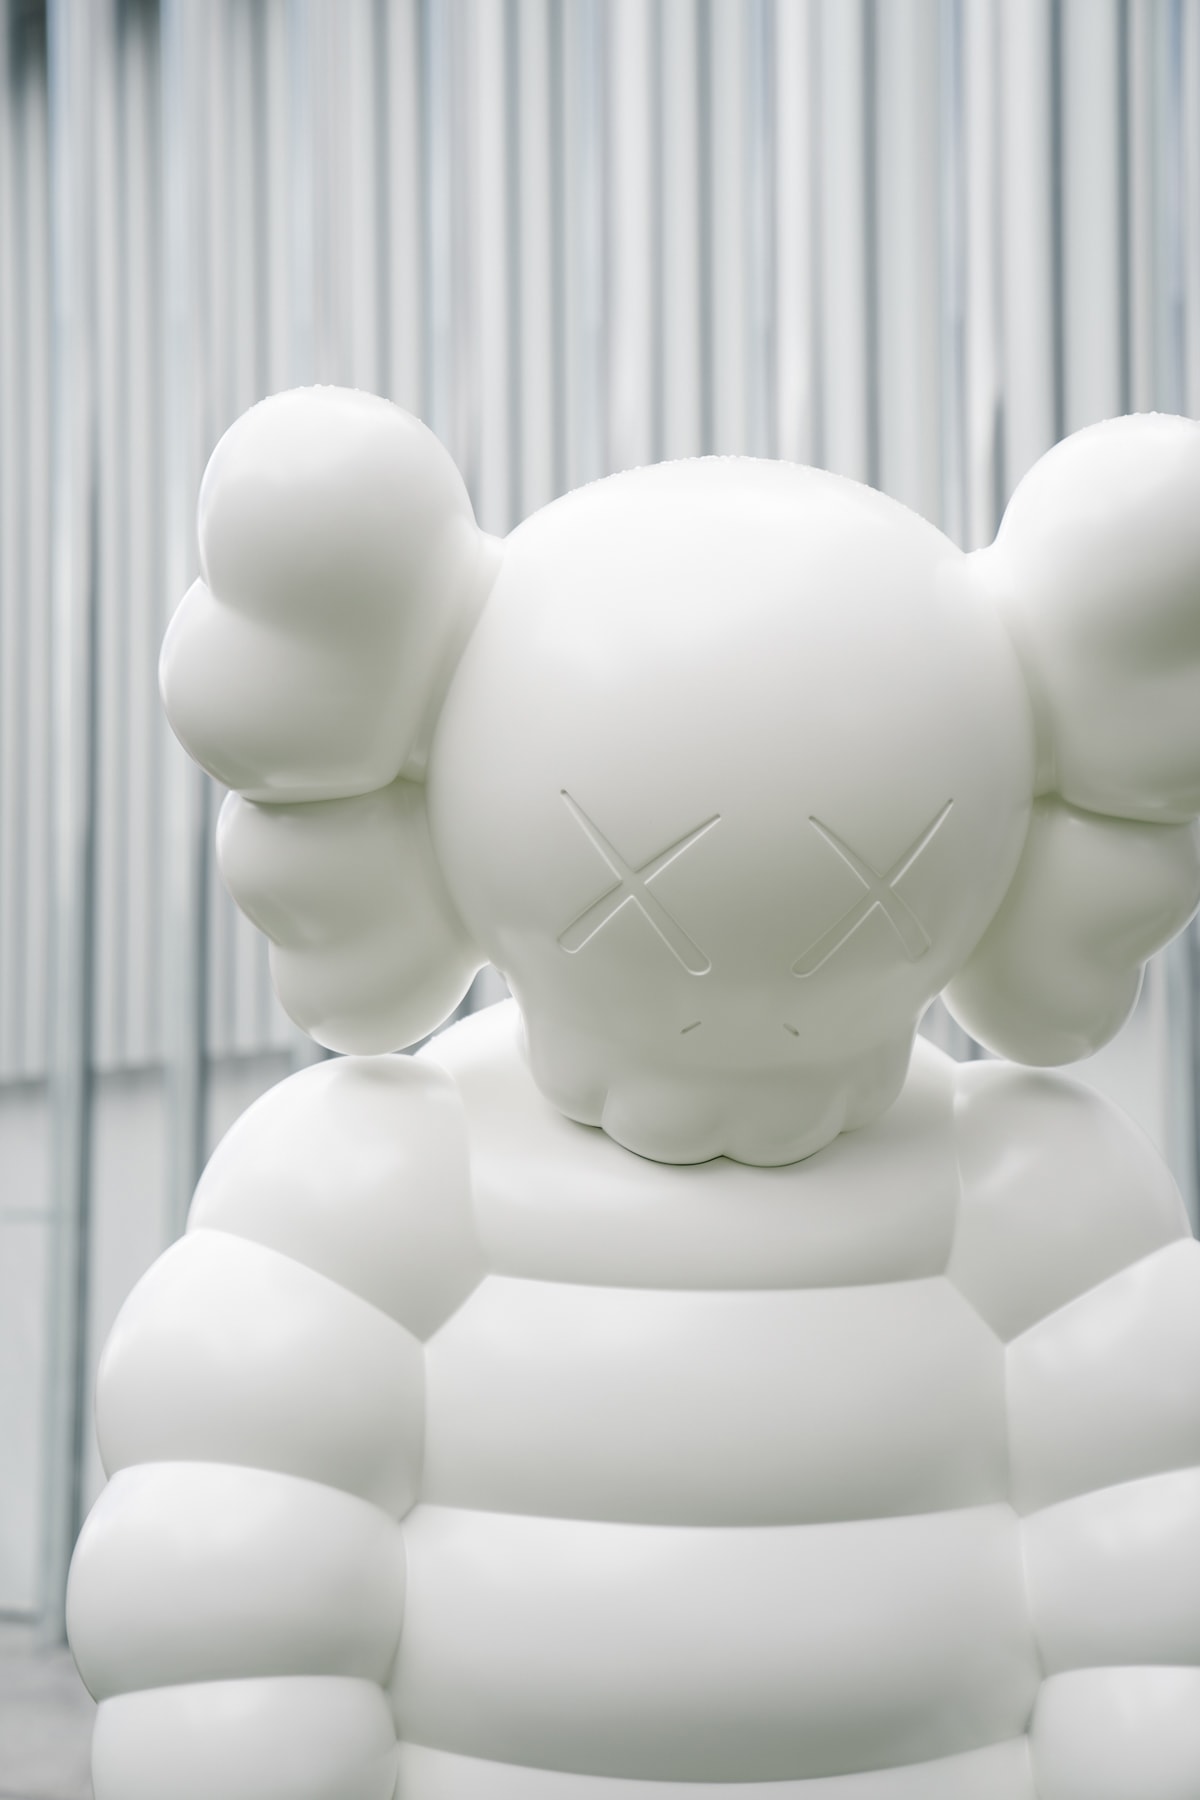 kaws what party installation statue figure sculpture